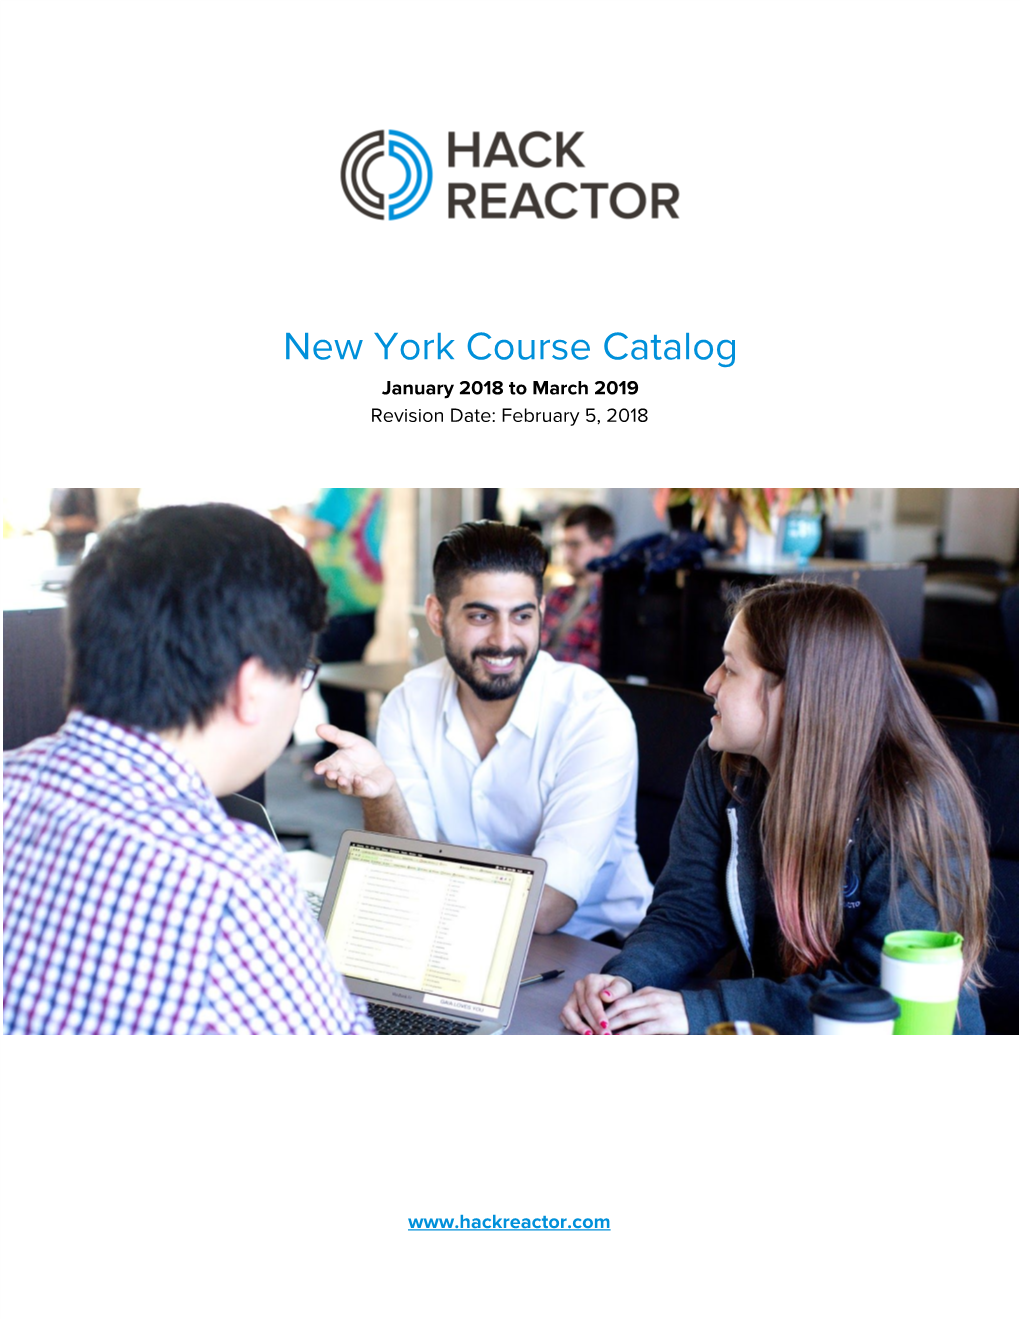 New York Course Catalog January 2018 to March 2019 Revision Date: February 5, 2018